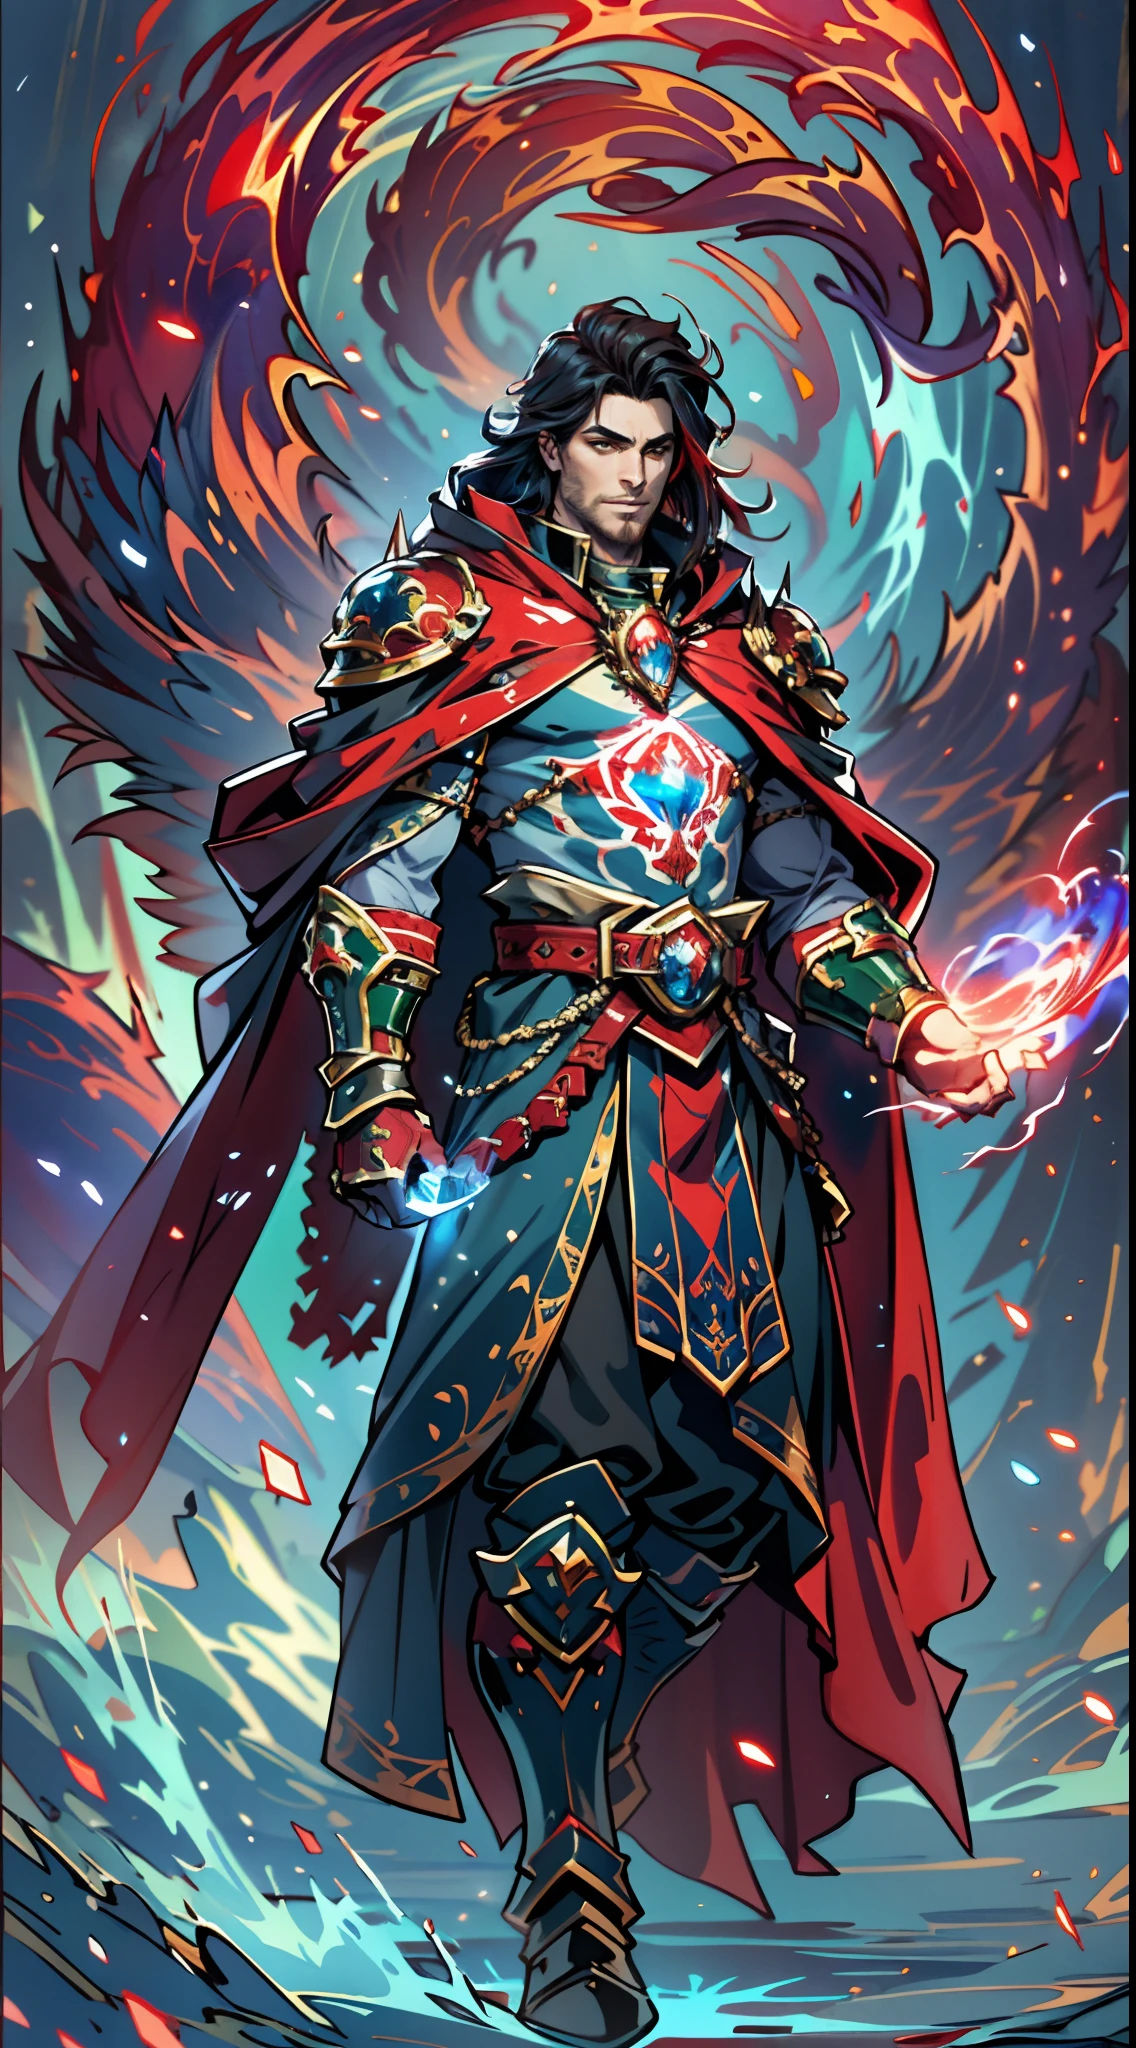 A man with long reddish-brown hair, wearing a red headband, an Eastern European face, deep and confident eyes, a confident smile, a red elongated totem mark on his face, a tall and strong physique, he wears a fantasy-style overlord attire, a blue-gold thick breastplate, a black tight-fitting undershirt, a massive cloak with heavy metal decorations, that cloak covers most of his body, thick red and blue heavy gauntlets, a metal belt with a thick long skirt-like hem, black pants, metal leg guards that match the gauntlets, he steps on the space with an awe-inspiring presence, red and blue and green energy surrounds him, red and blue and green Power surrounds him, white frost swirls around him, blue ice around him, red fire around him, purple Lightning around him, this character embodies a finely crafted fantasy-style overlord in anime style, characterized by an exquisite and mature manga illustration art style, high definition, best quality, highres, ultra-detailed, ultra-fine painting, extremely delicate, professional, anatomically correct, symmetrical face, extremely detailed eyes and face, high quality eyes, creativity, RAW photo, UHD, 8k, Natural light, cinematic lighting, masterpiece:1.5